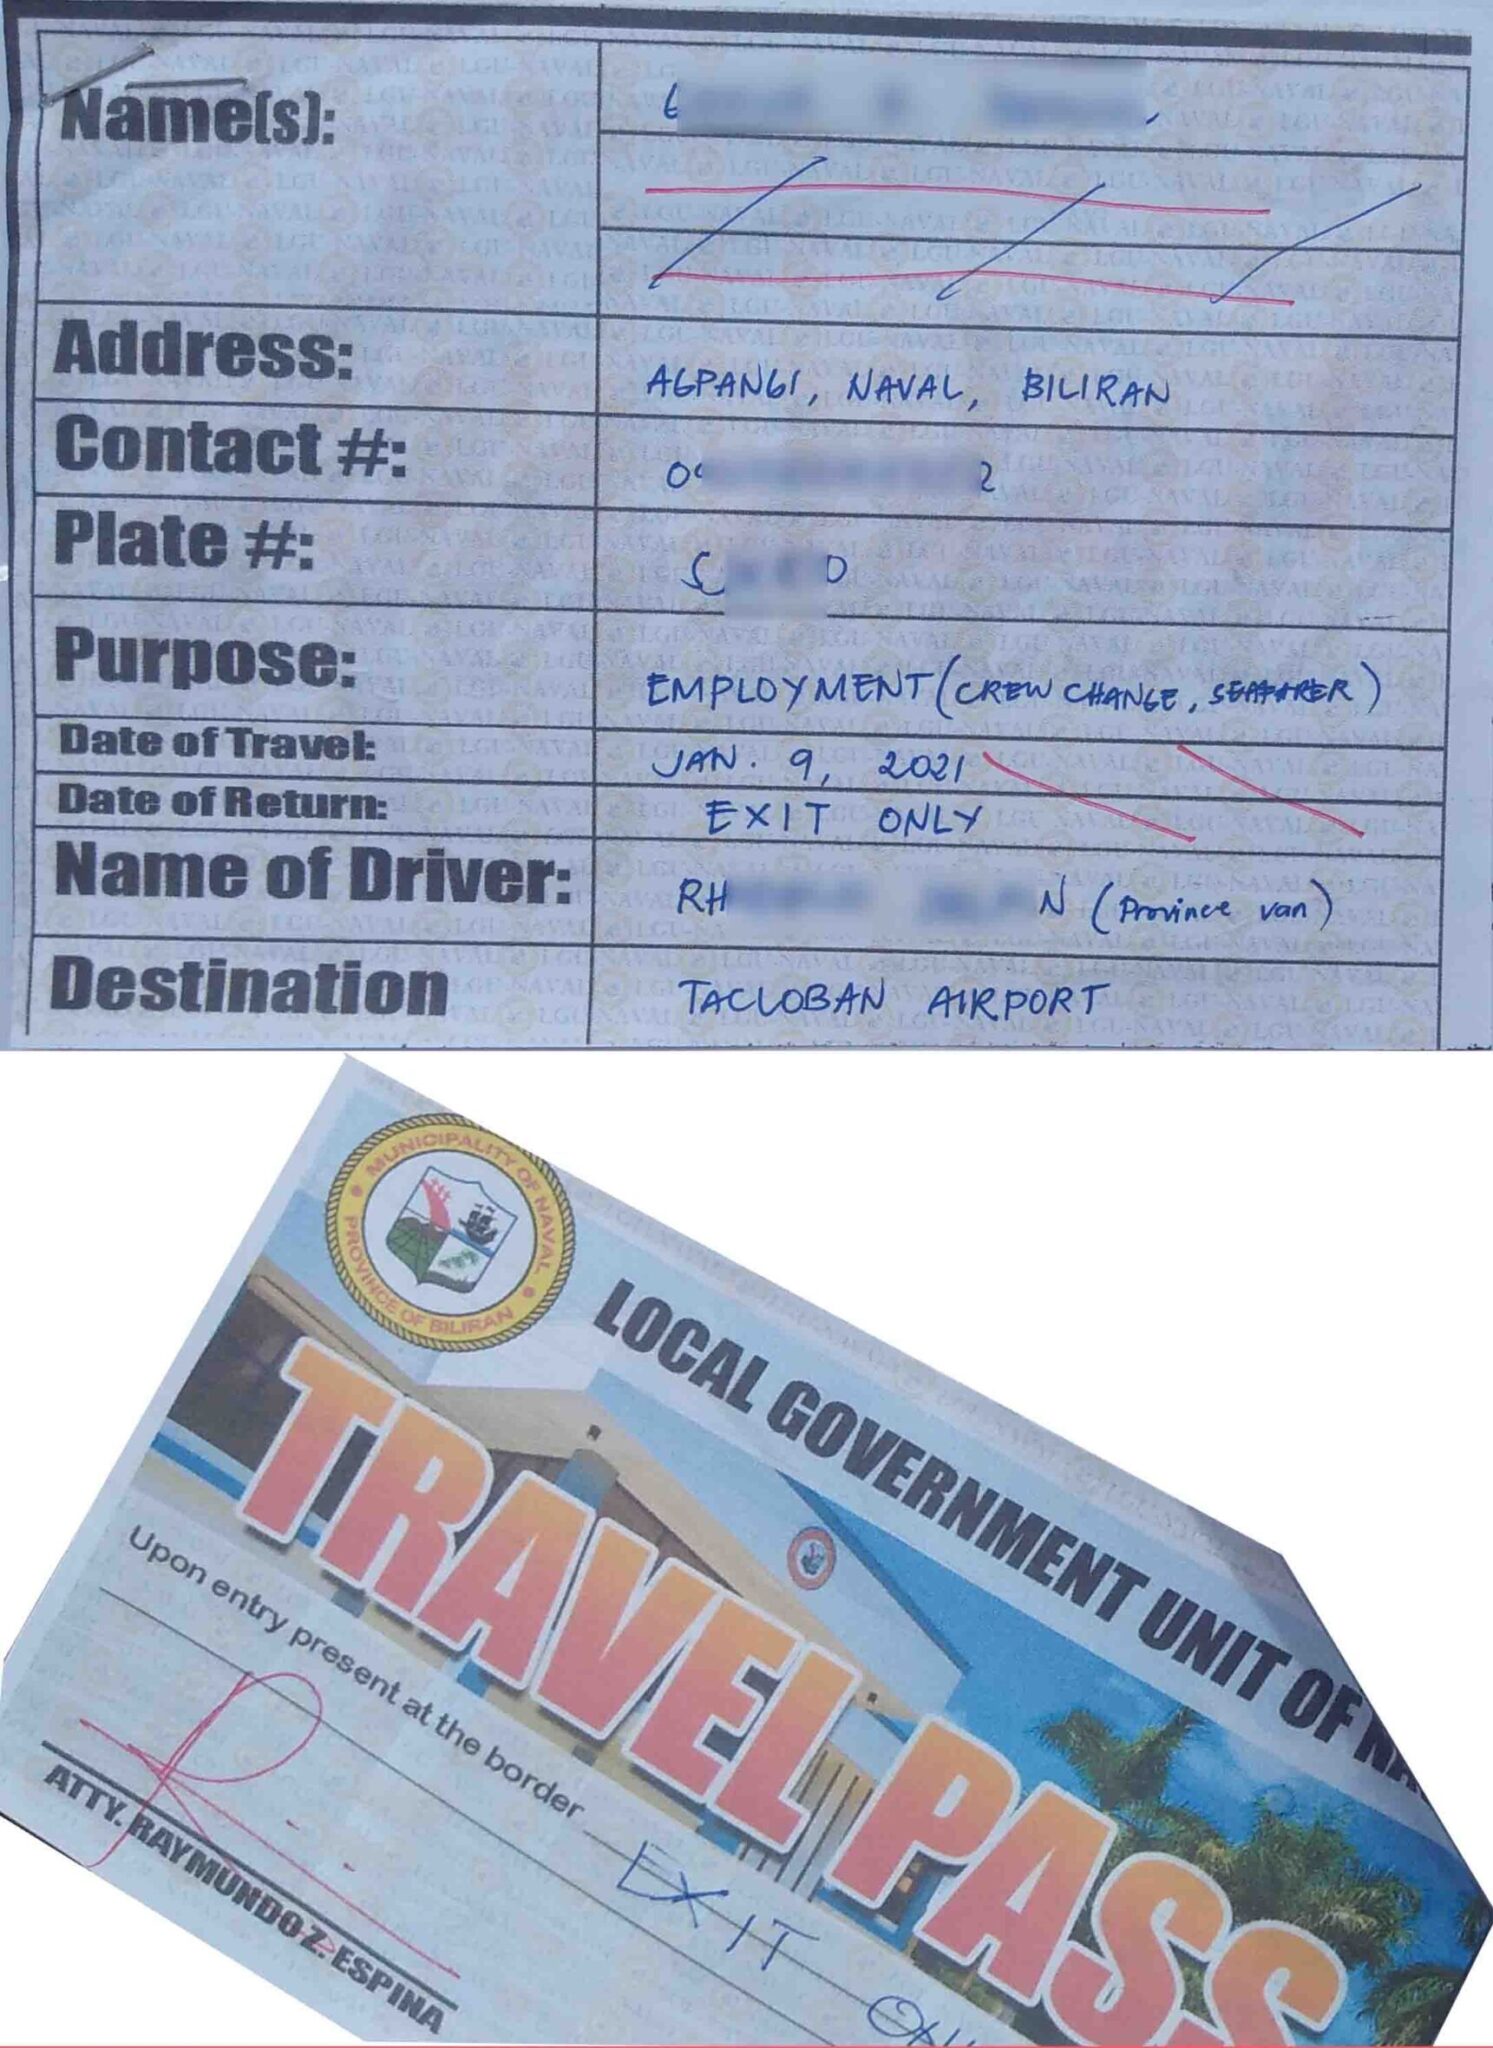 Travel Pass issued by LGU-Naval.